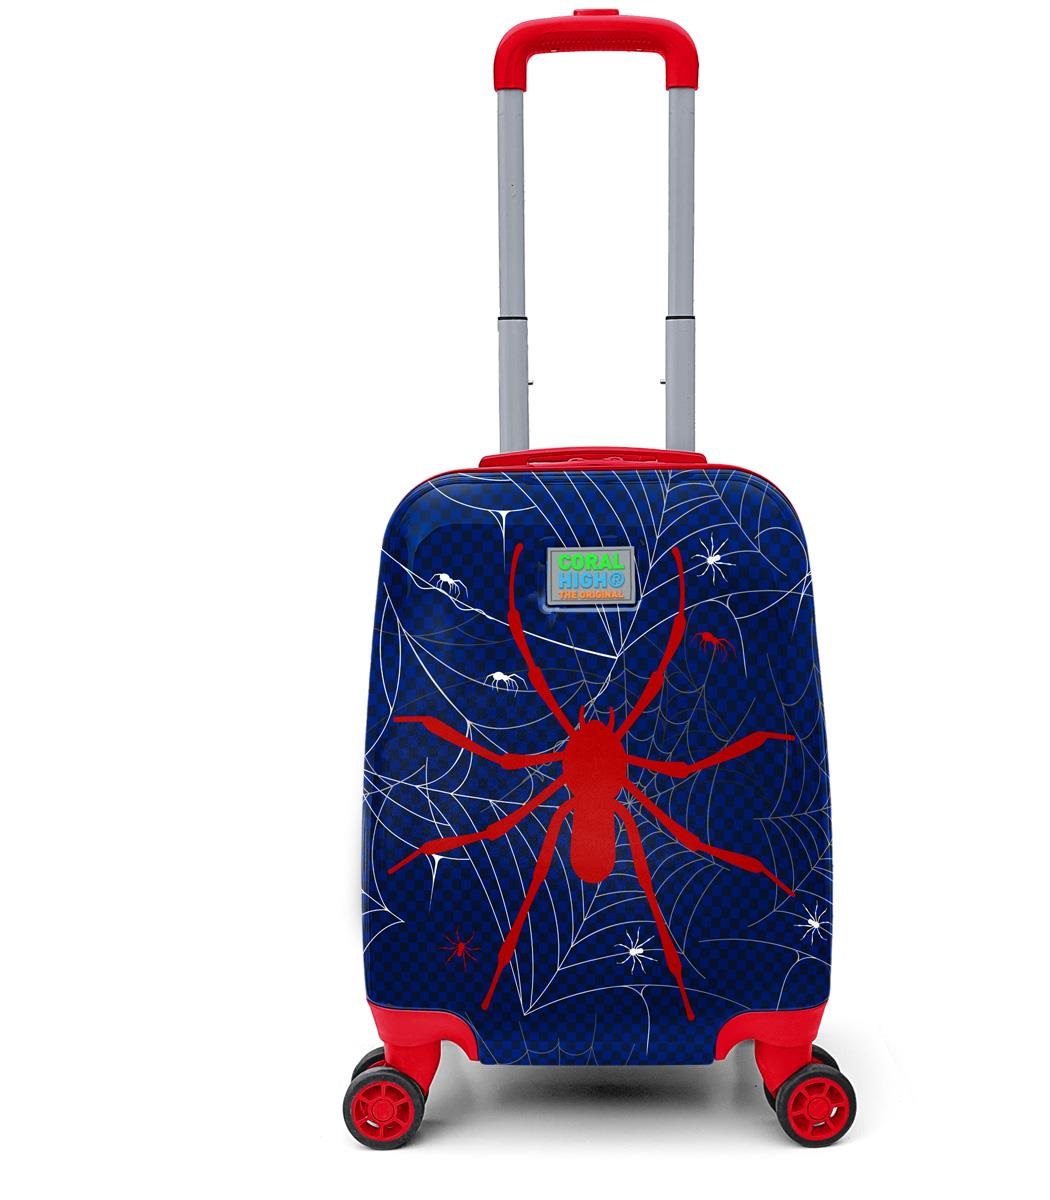 Coral High Kids Luggage suitcase - Navy Blue Red Spider Patterned